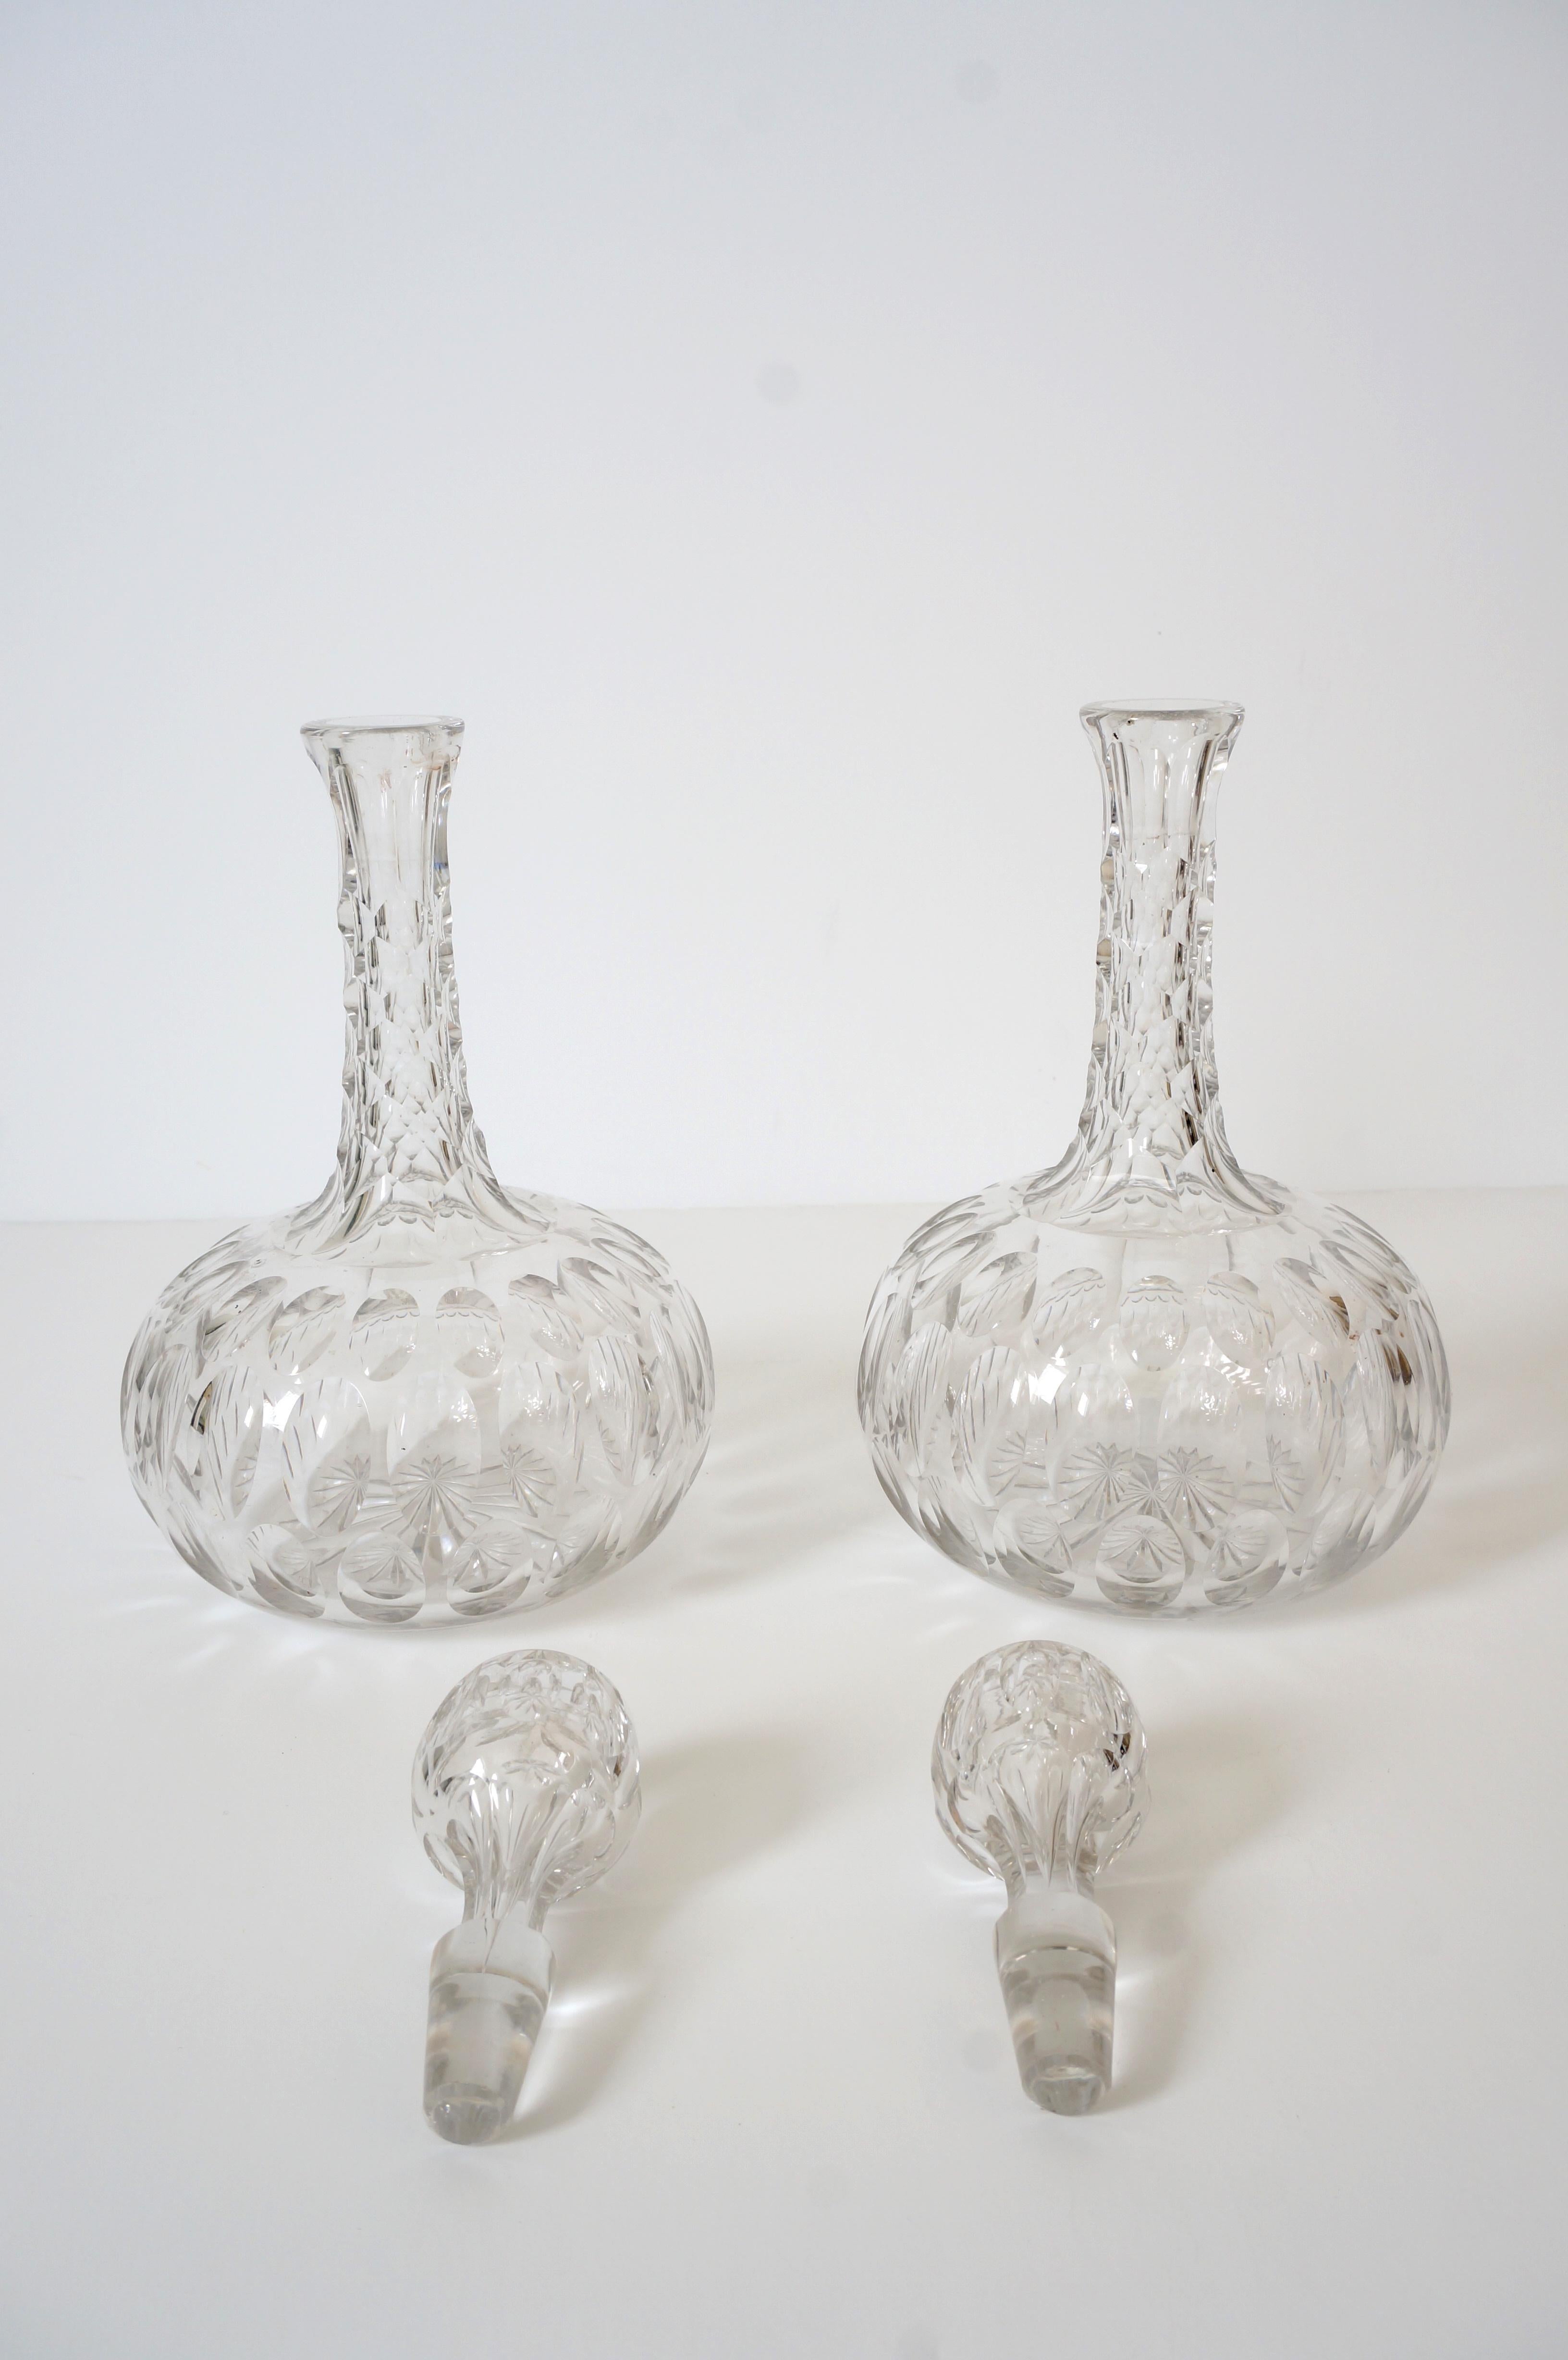 This stylish set of two English Regency revial form cut crystal decanters will make a handsome addition to your barware collection. The optic cameos catch the light beautifully and the cut grip on the neck makes for a secure handle on the pieces.